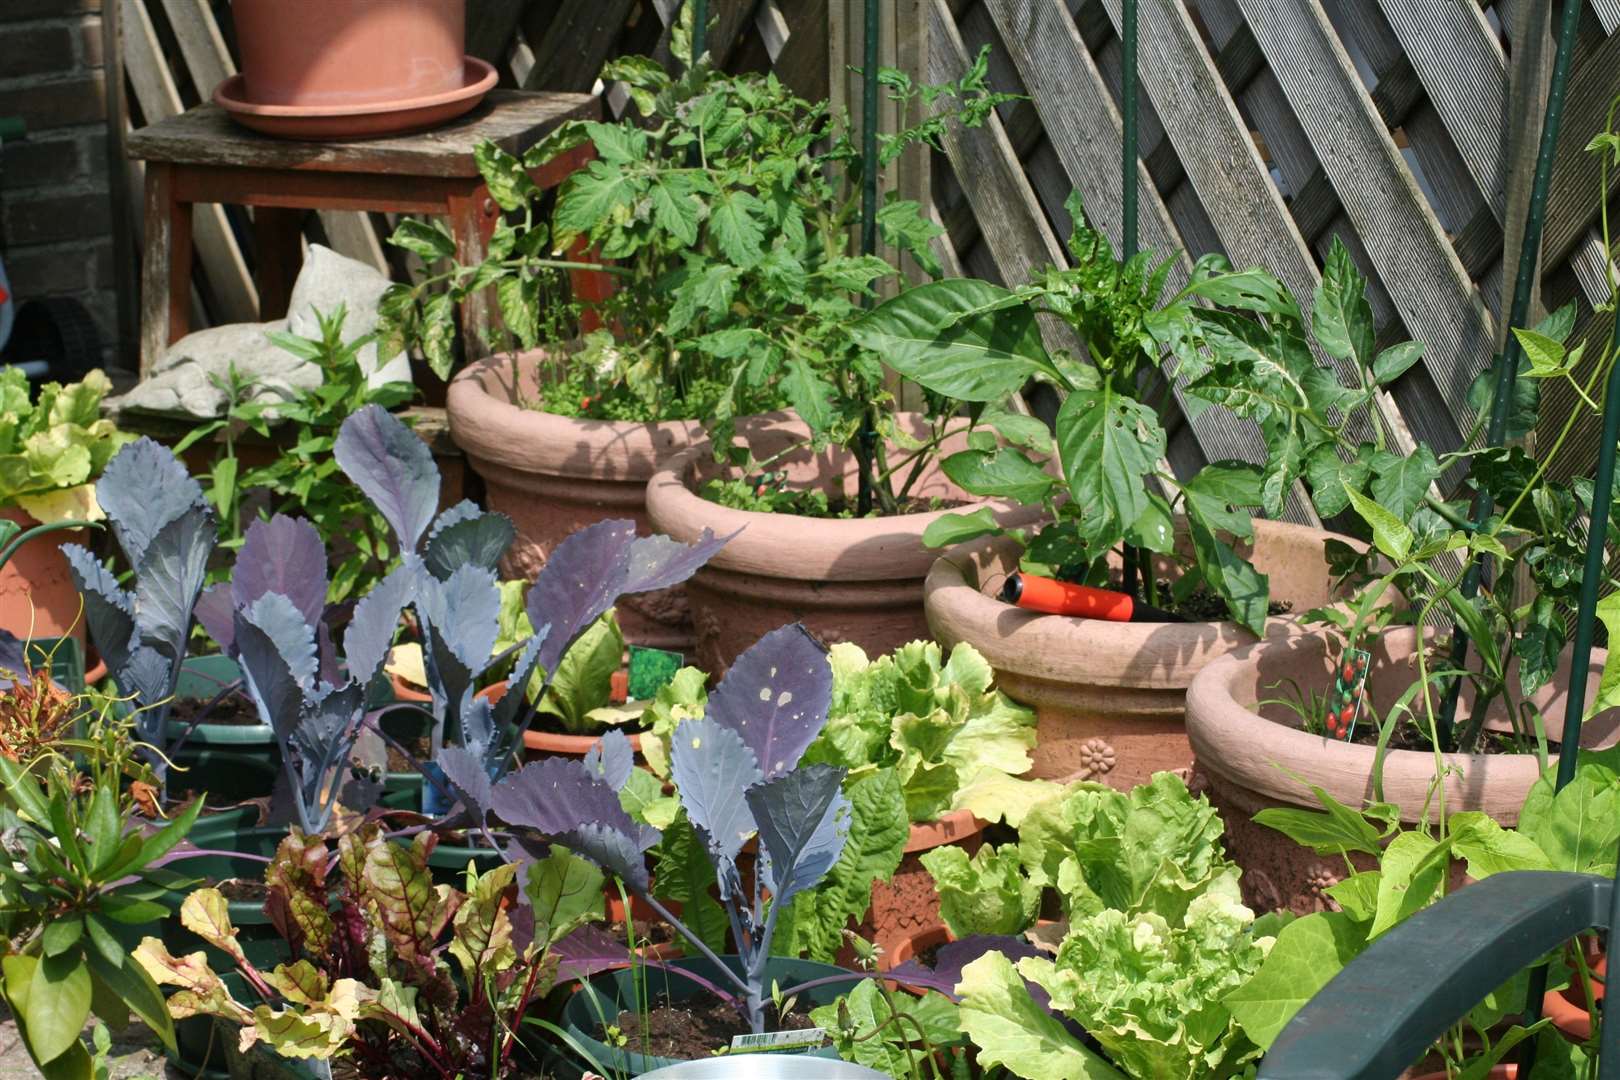 Tasty herbs and salads from the garden can add to your sensory enjoyment.